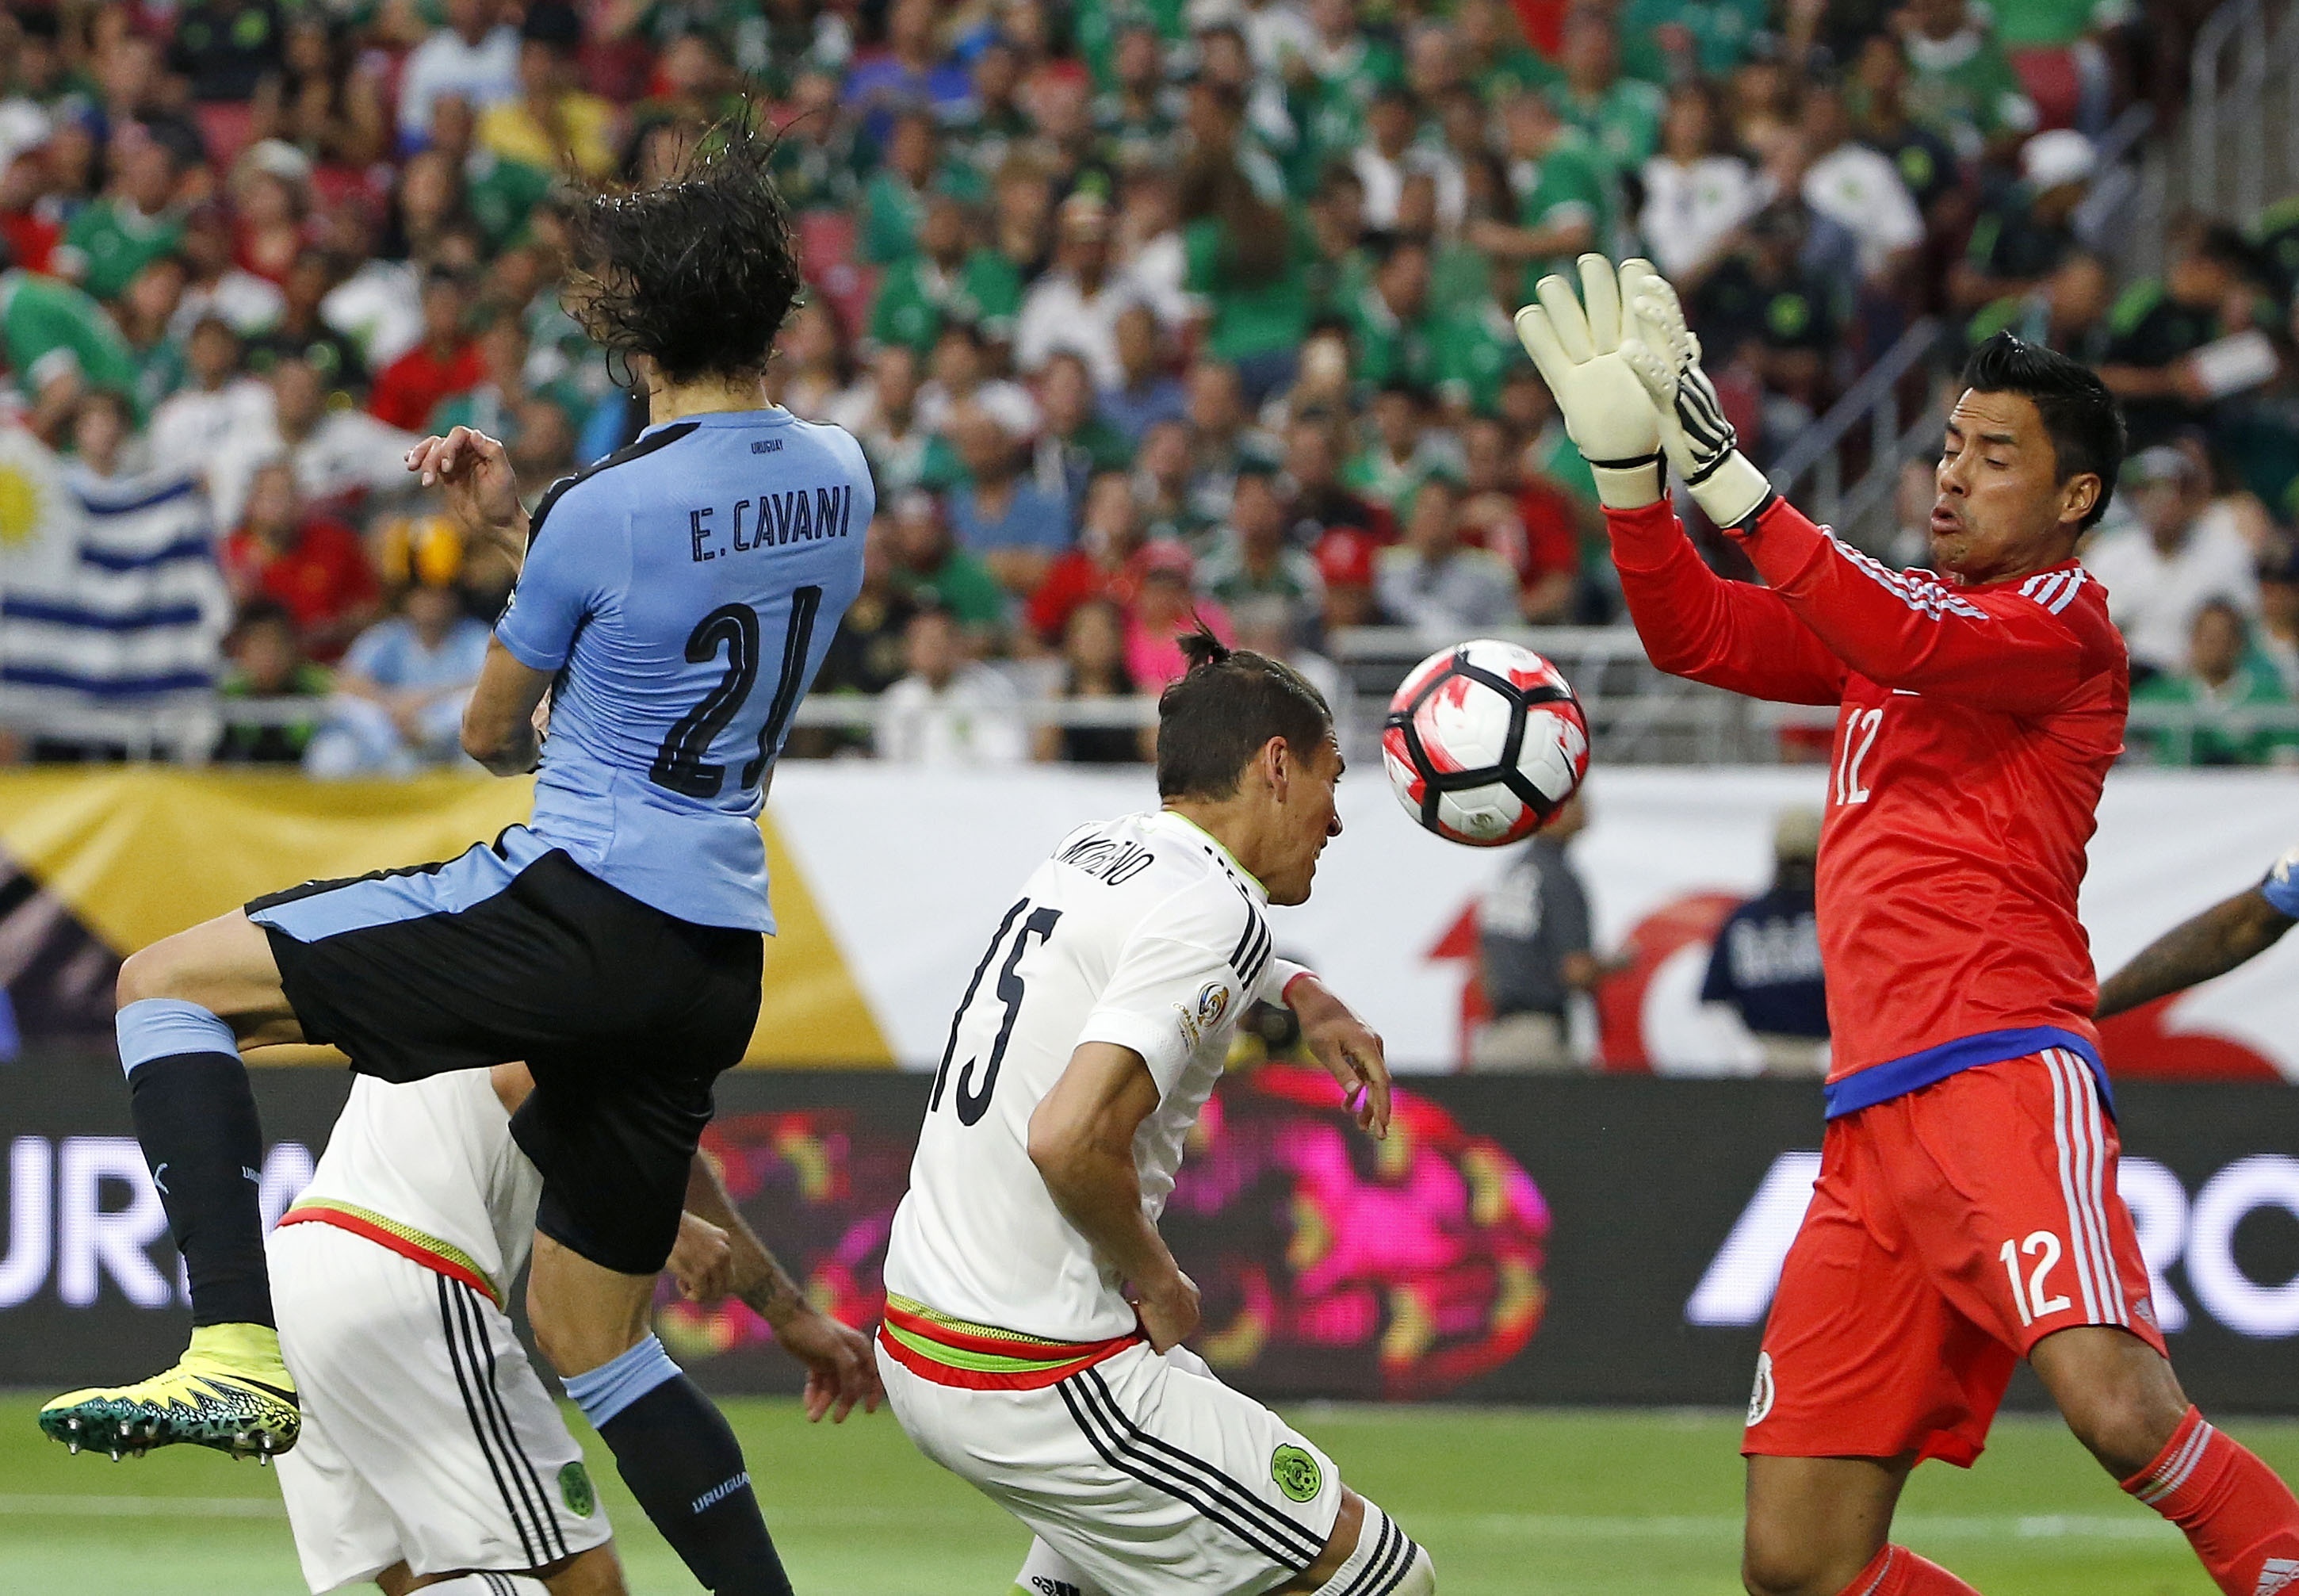 Mexico's Alfredo Talavera (12) makes a save on a shot by Uruguay's Edinson Cavani (21) as Mexico's Hector Moreno (15) defends during the second half of a Copa America group C soccer match at University of Phoenix Stadium Sunday, June 5, 2016, in Glendale, Ariz. Mexico defeated Uruguay 3-1. (AP Photo/Ross D. Franklin)